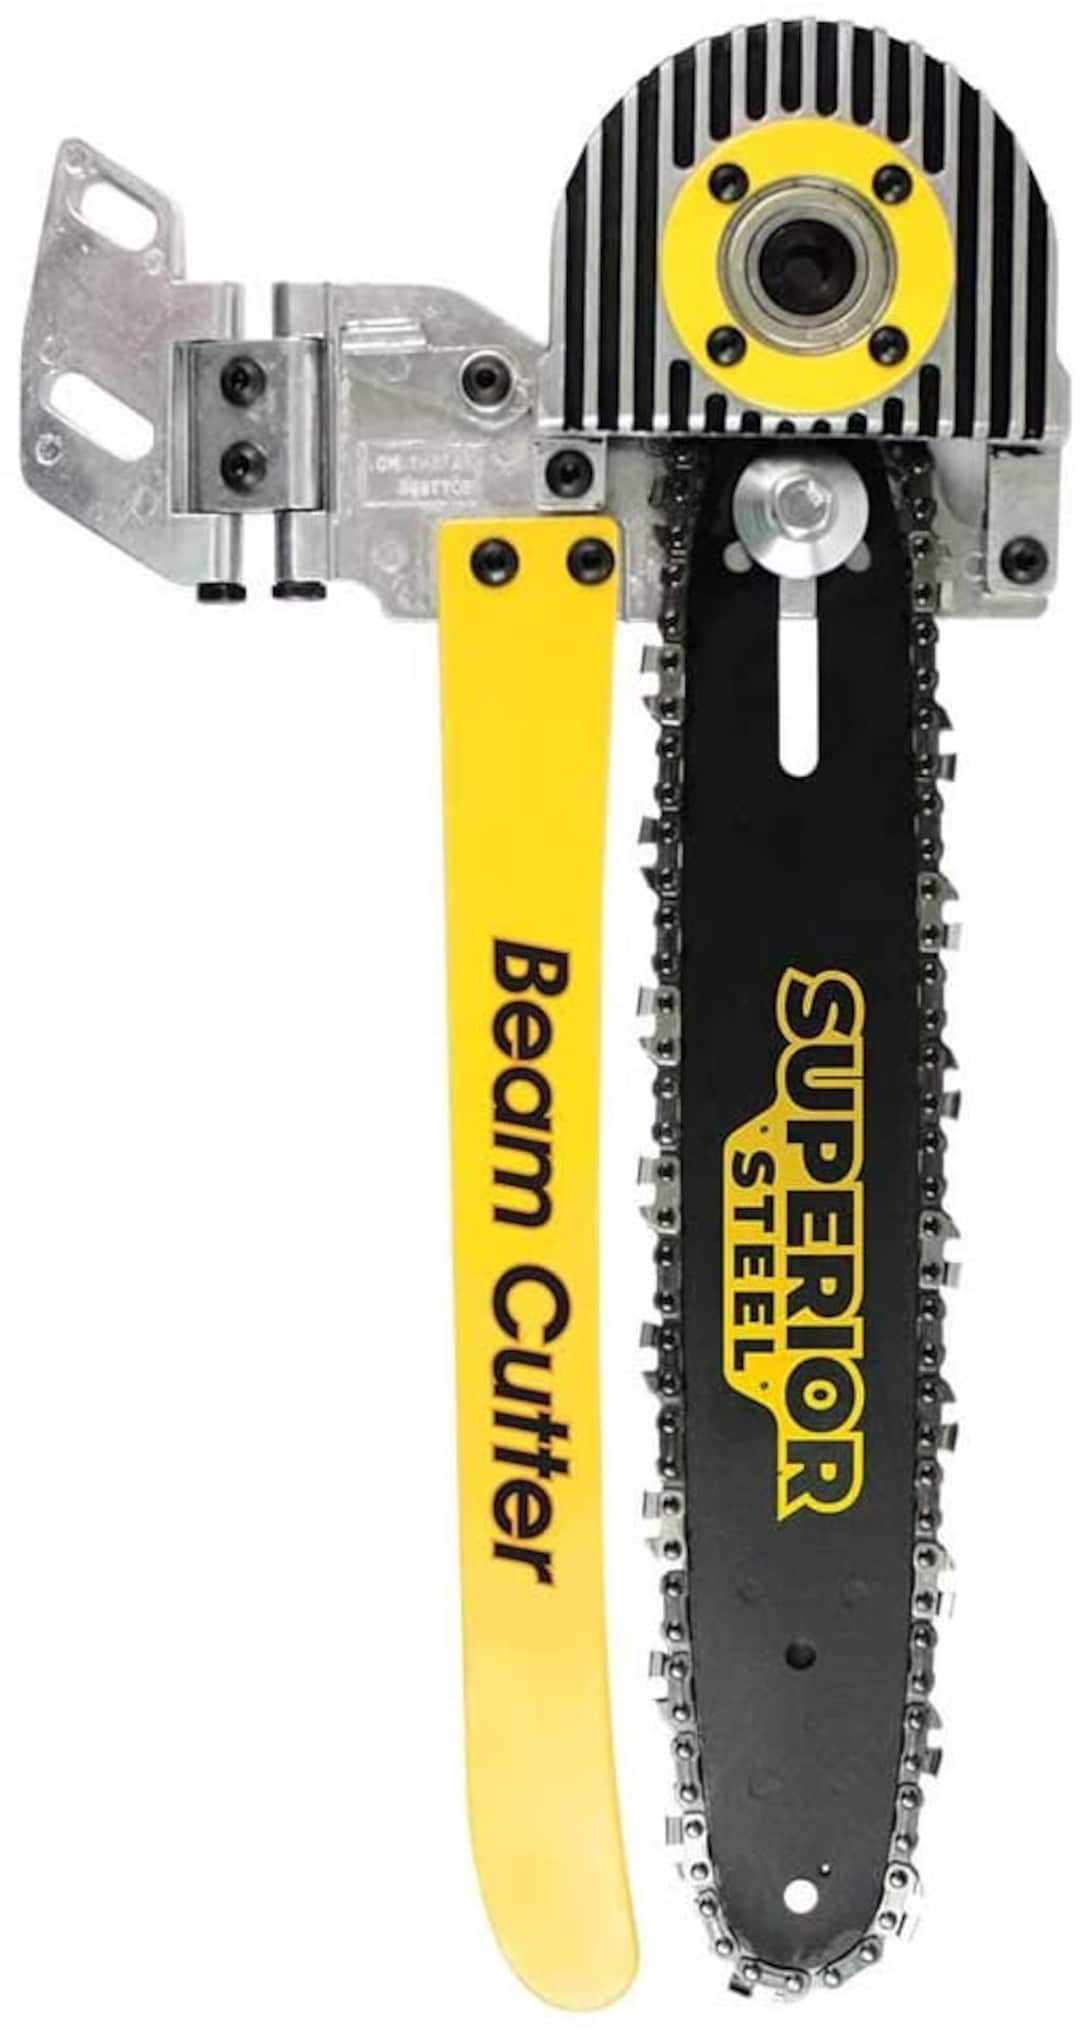 Superior Steel S77000 12 for Worm Drive Saws - België